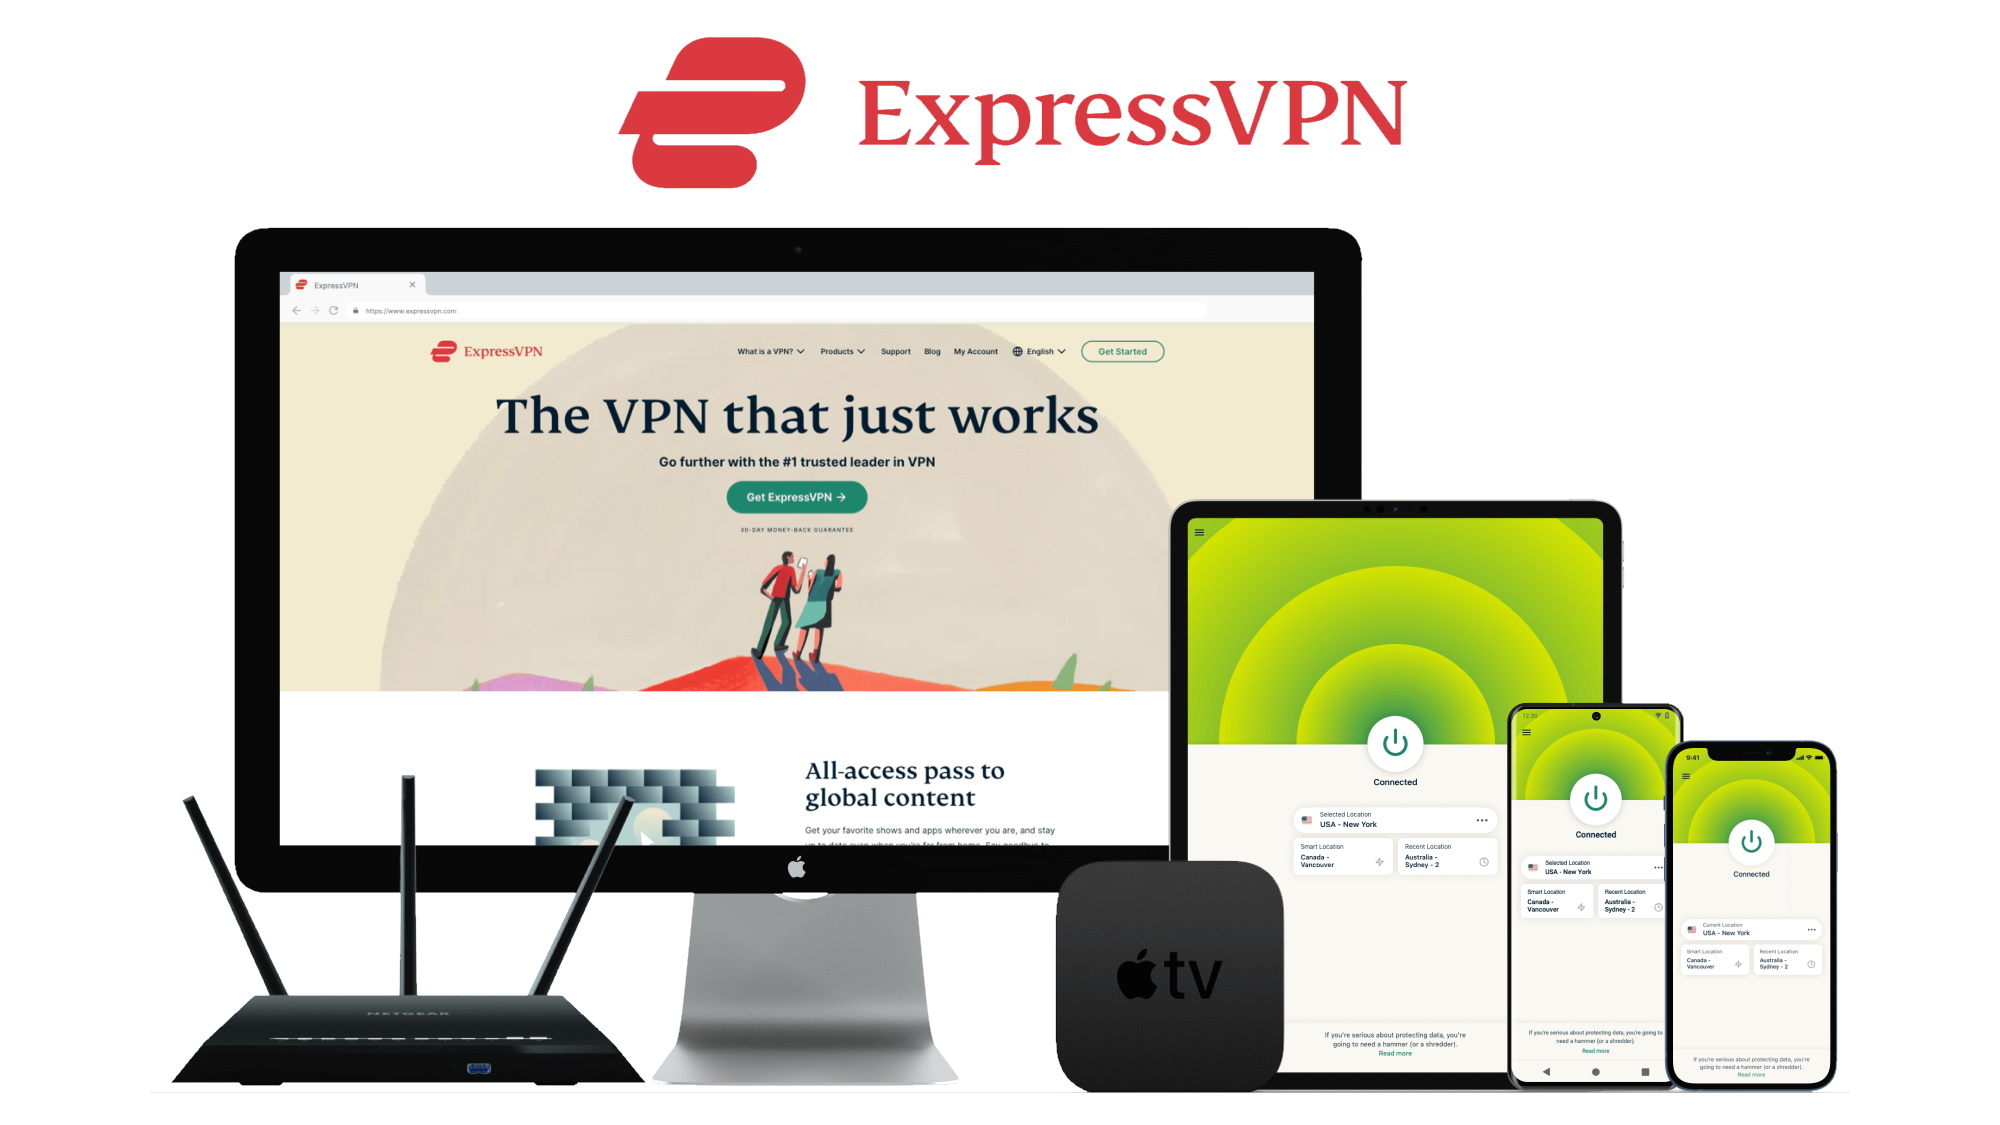 ExpressVPN, running on Windows, Mac, tablet, iPhone, Android, router, and AppleTV